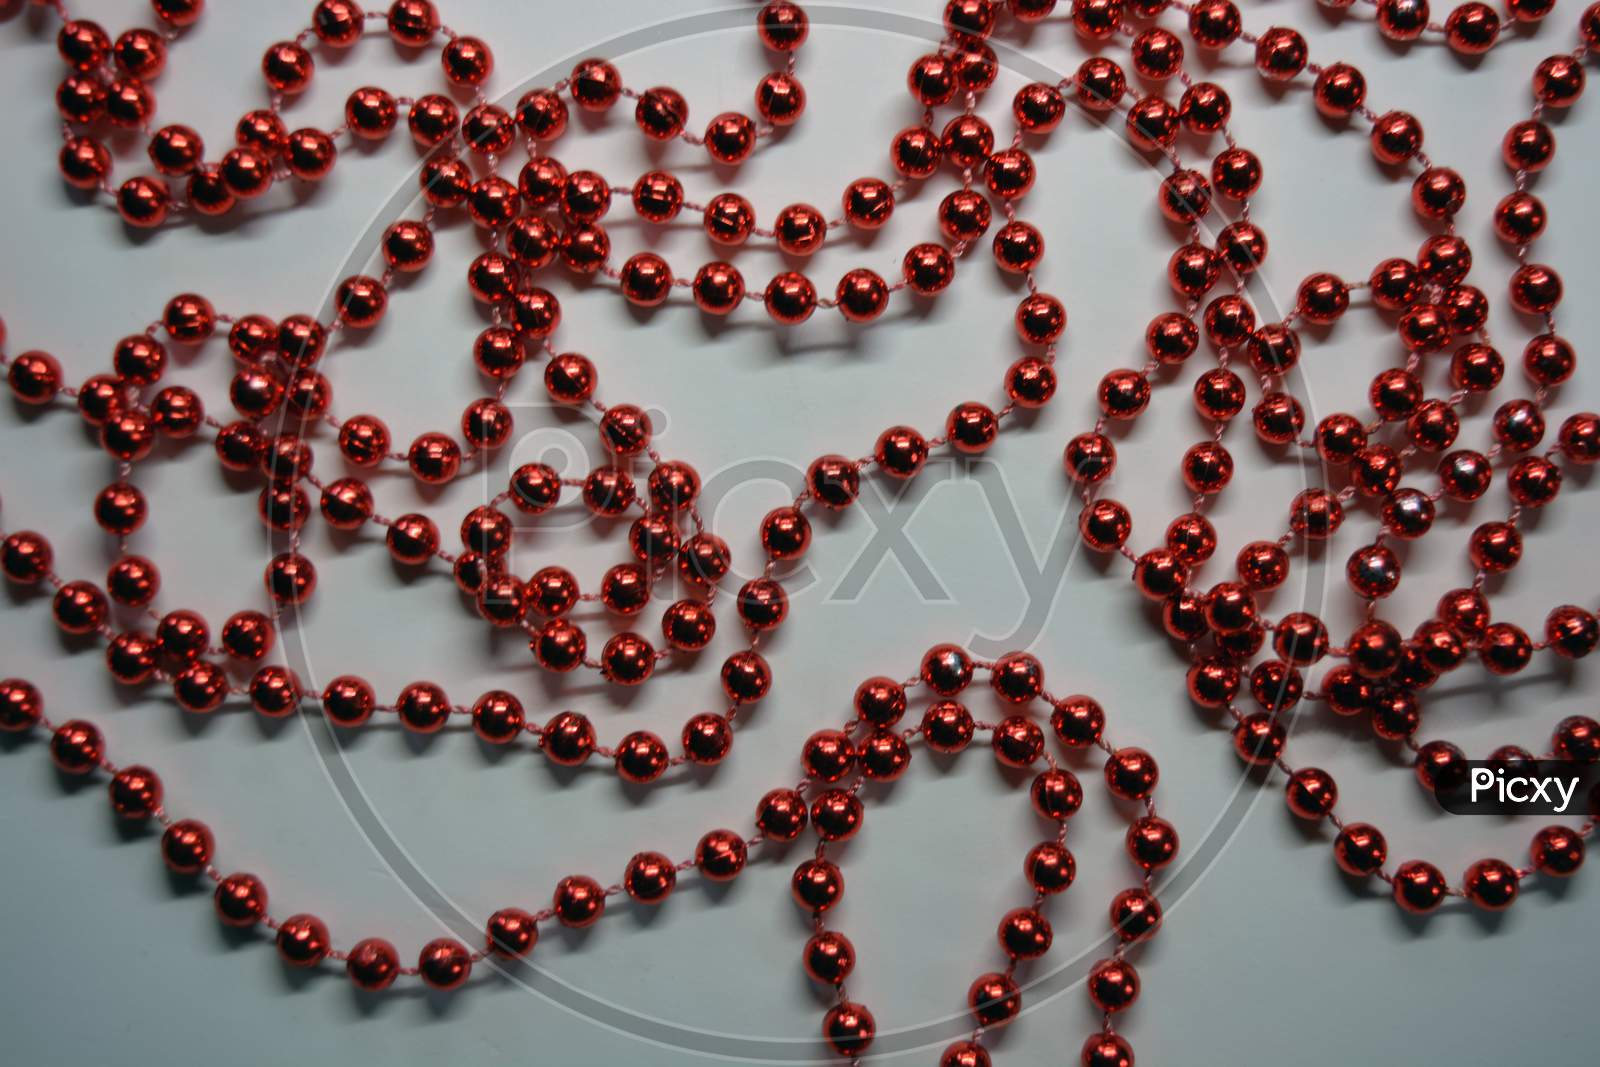 Beautiful red minor Christmas beads for decorating Christmas tree arranged on a white background.